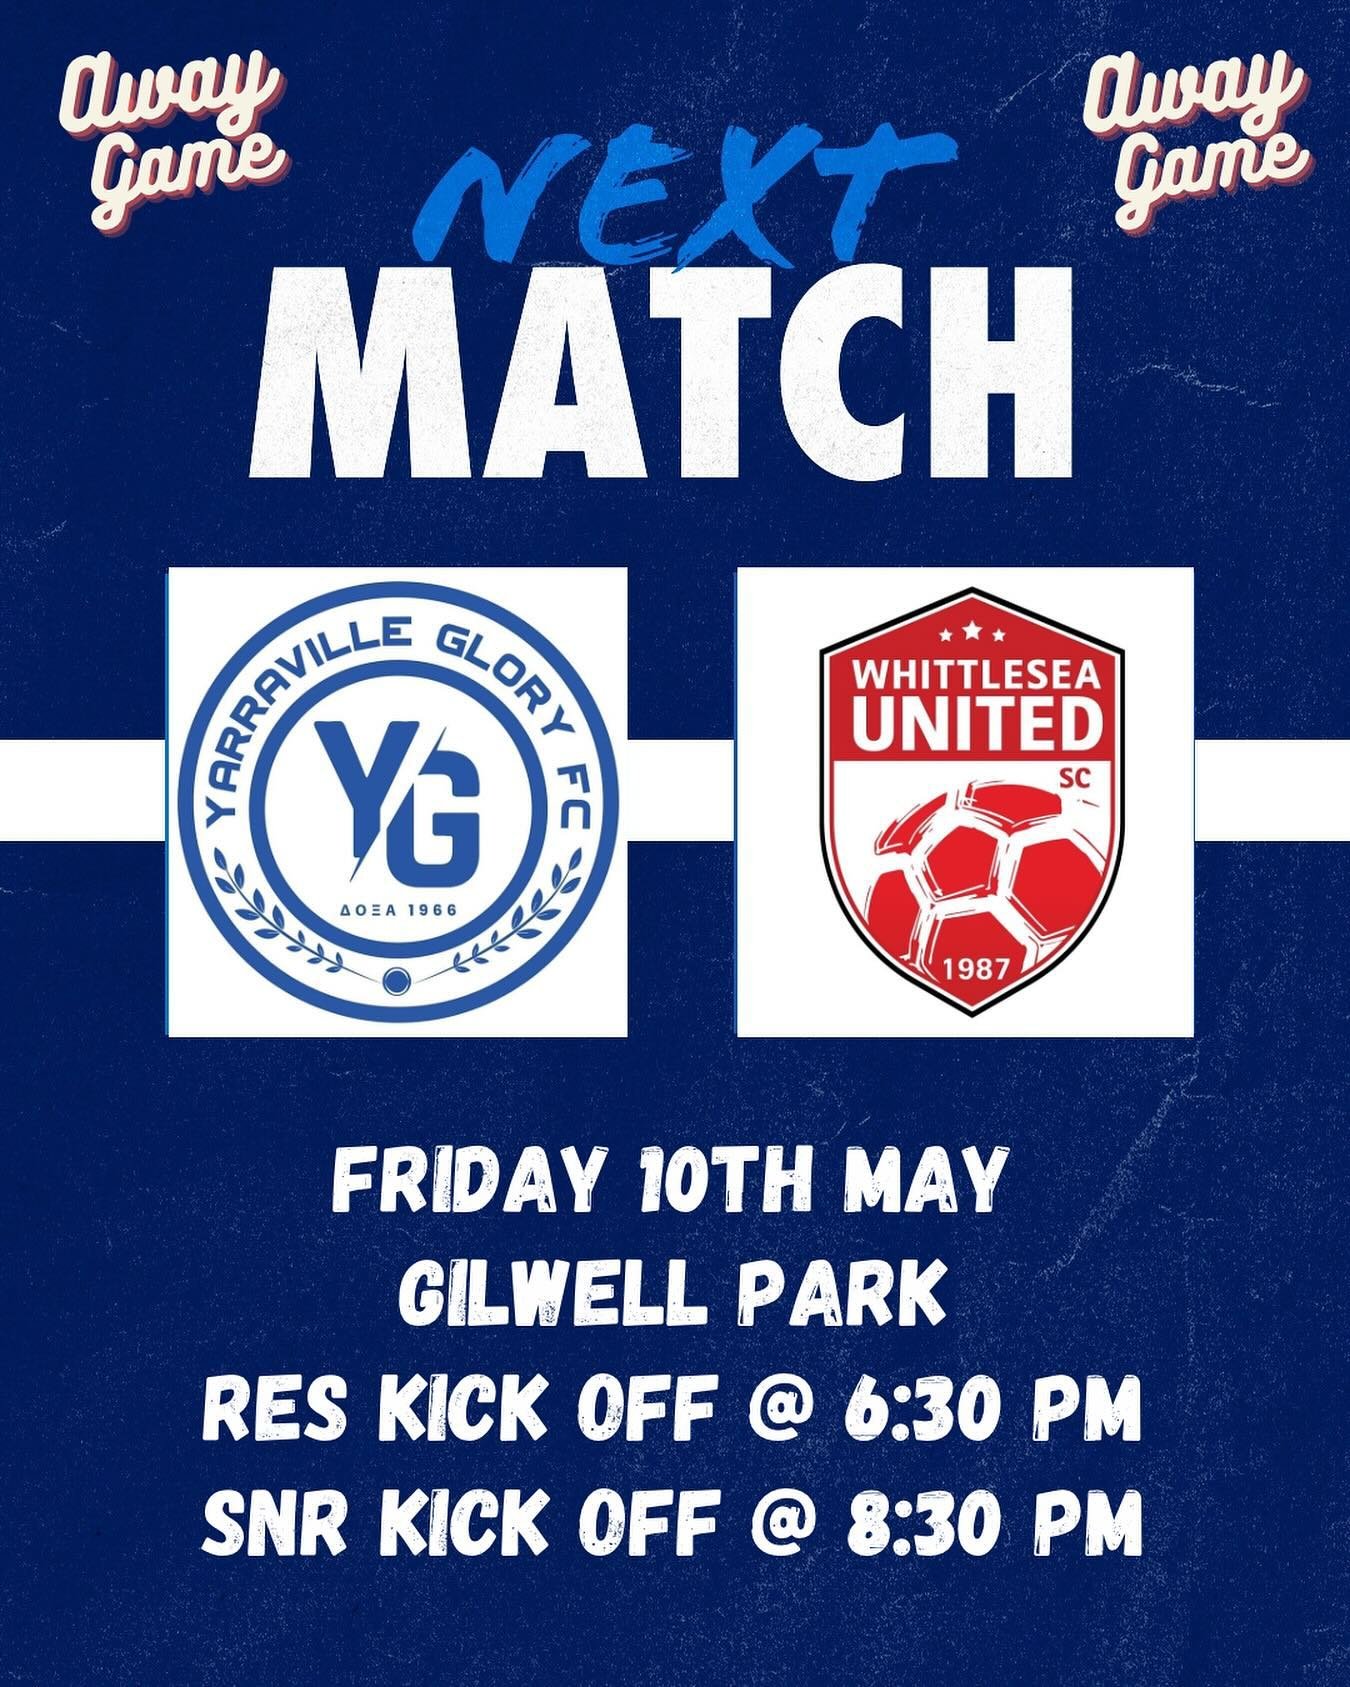 Our seniors men and reserve teams are away this week playing Whittlesea United SC on Friday night.  The reserves start at 6:30pm with the seniors at 8:3pm so get and get watch #glory #ygfc #doxa